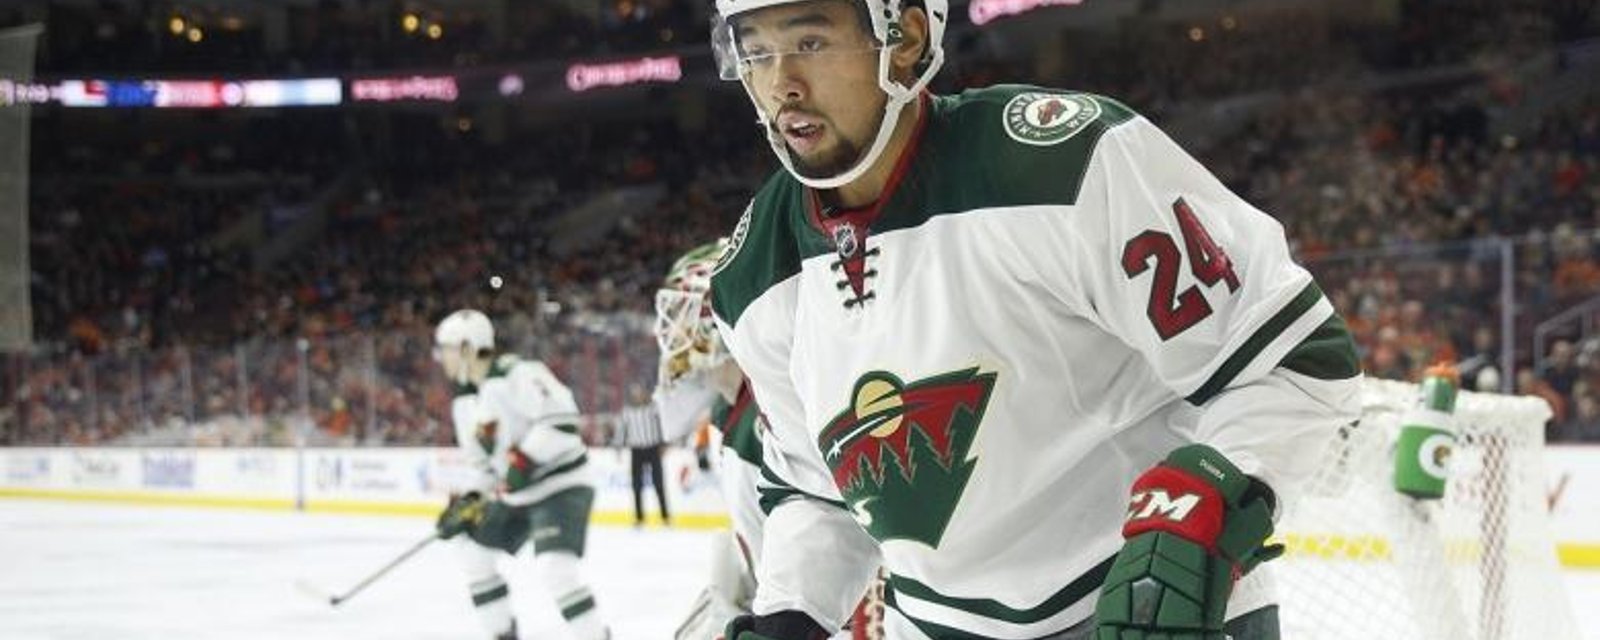 Wild scratch two defenseman ahead of must-win game, and they aren't happy.